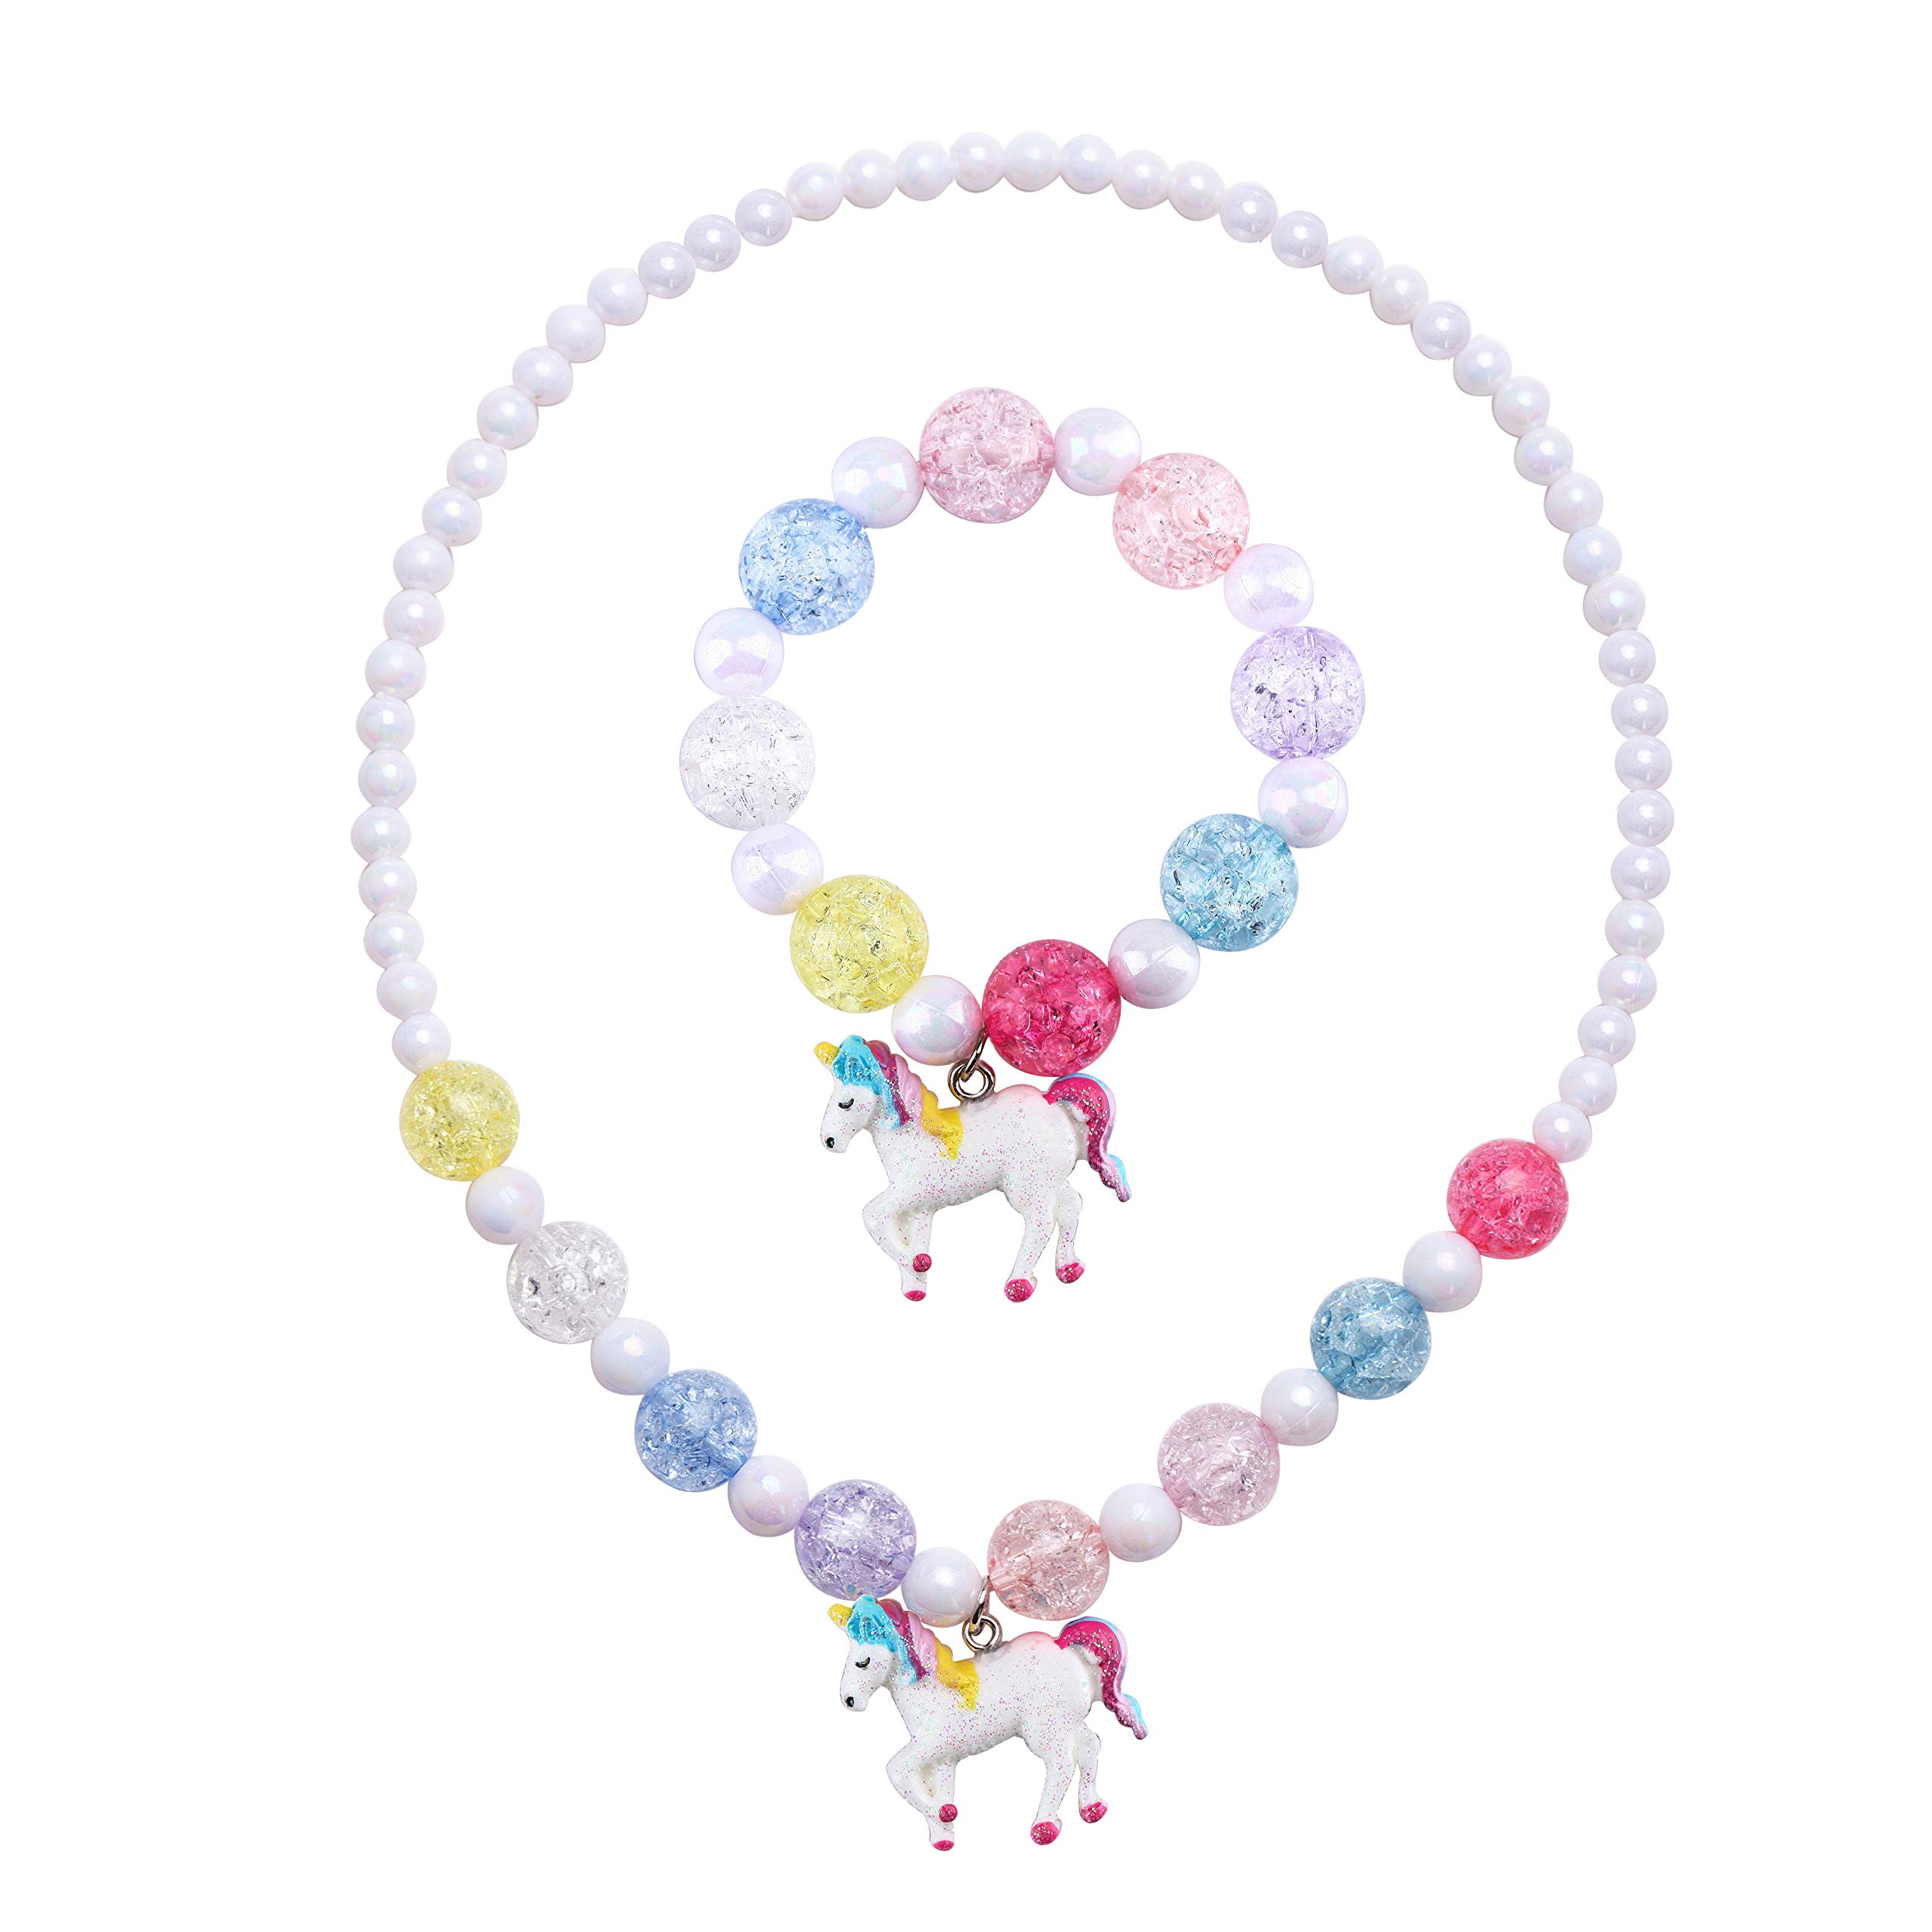 SkyWiseWin Unicorn Necklace for Girls Toddler Jewelry Stretch Necklace Bracelet Set, Little Princess Jewelry Kids Play Necklaces Unicorns Gifts for Kids